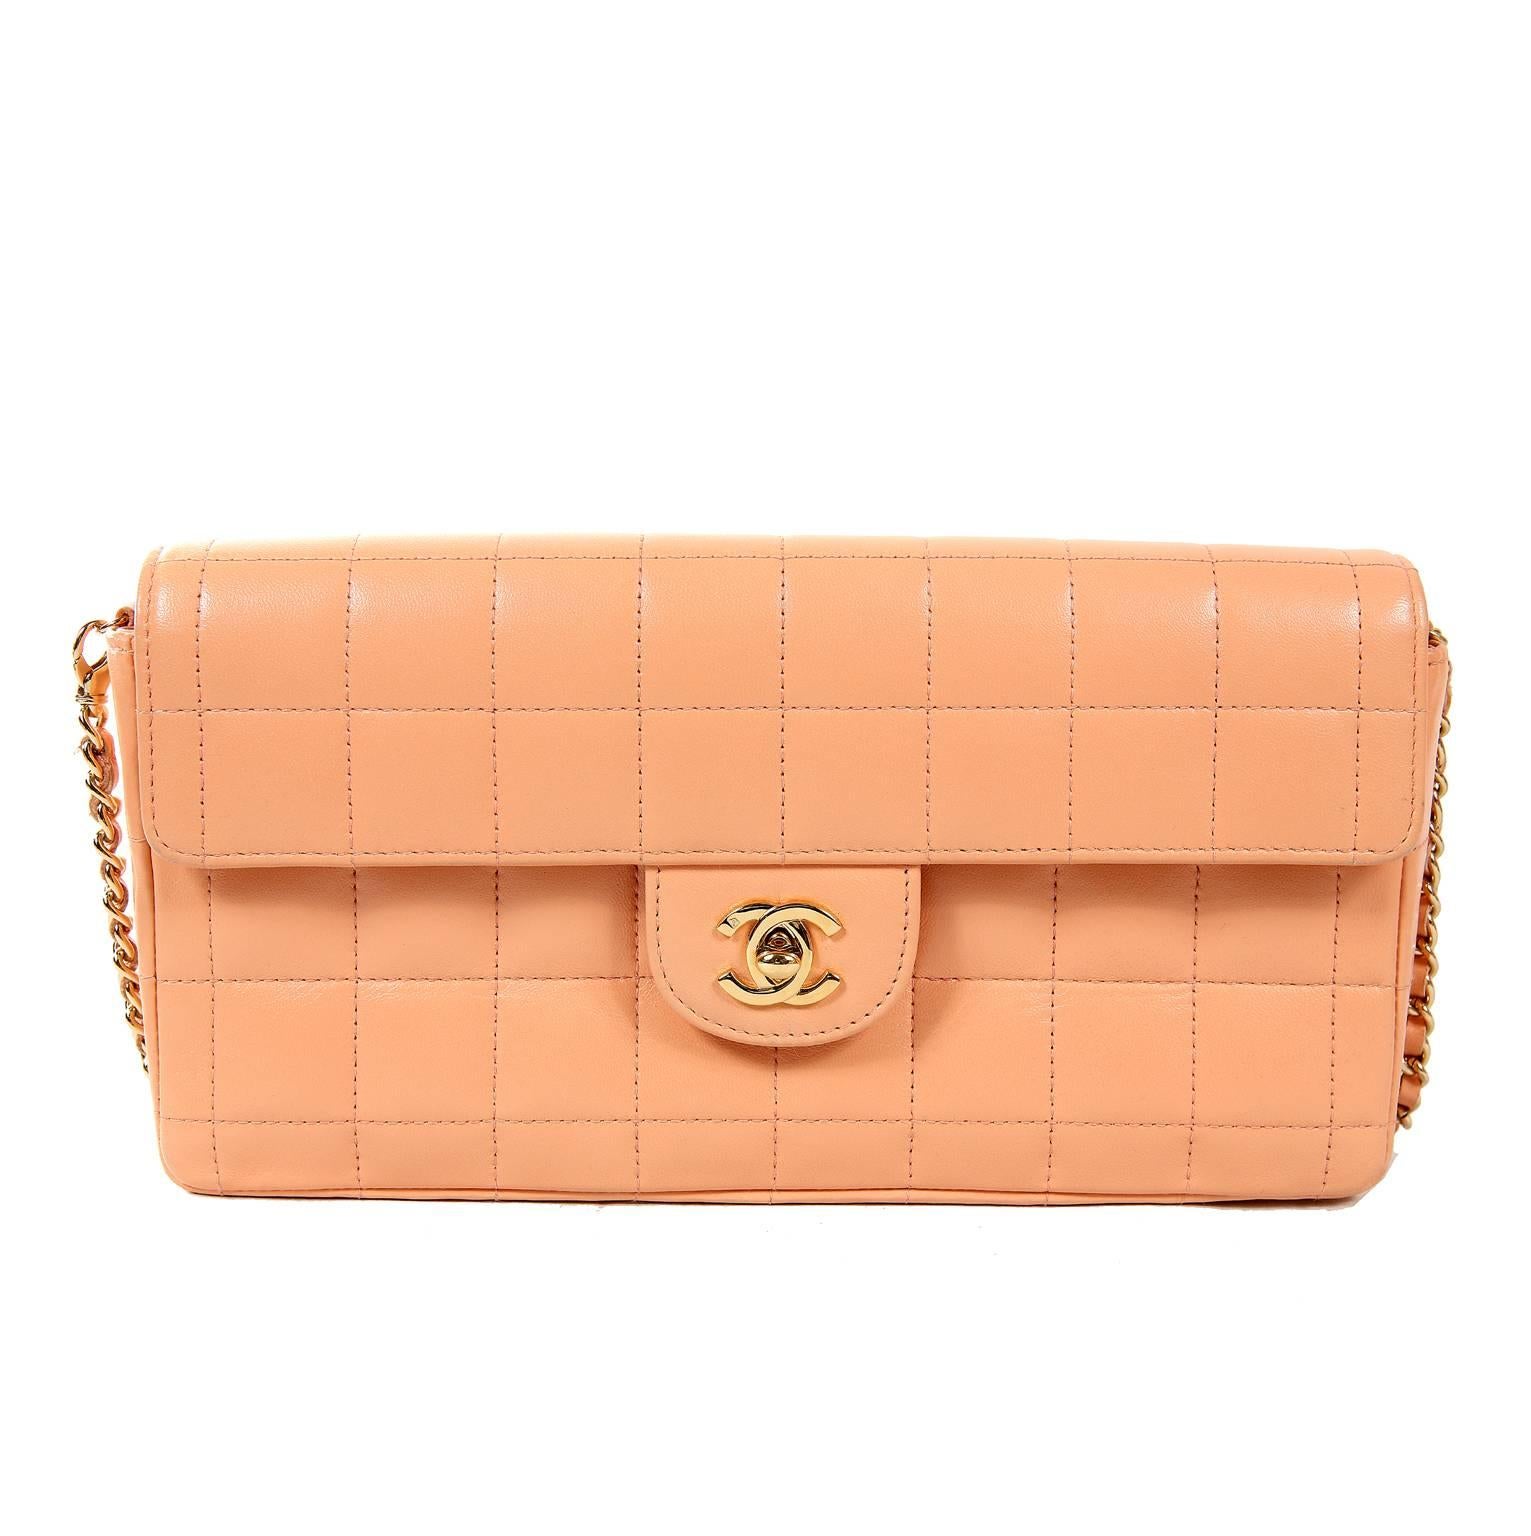 Chanel Pink Square Quilted Leather East West Flap Bag 1